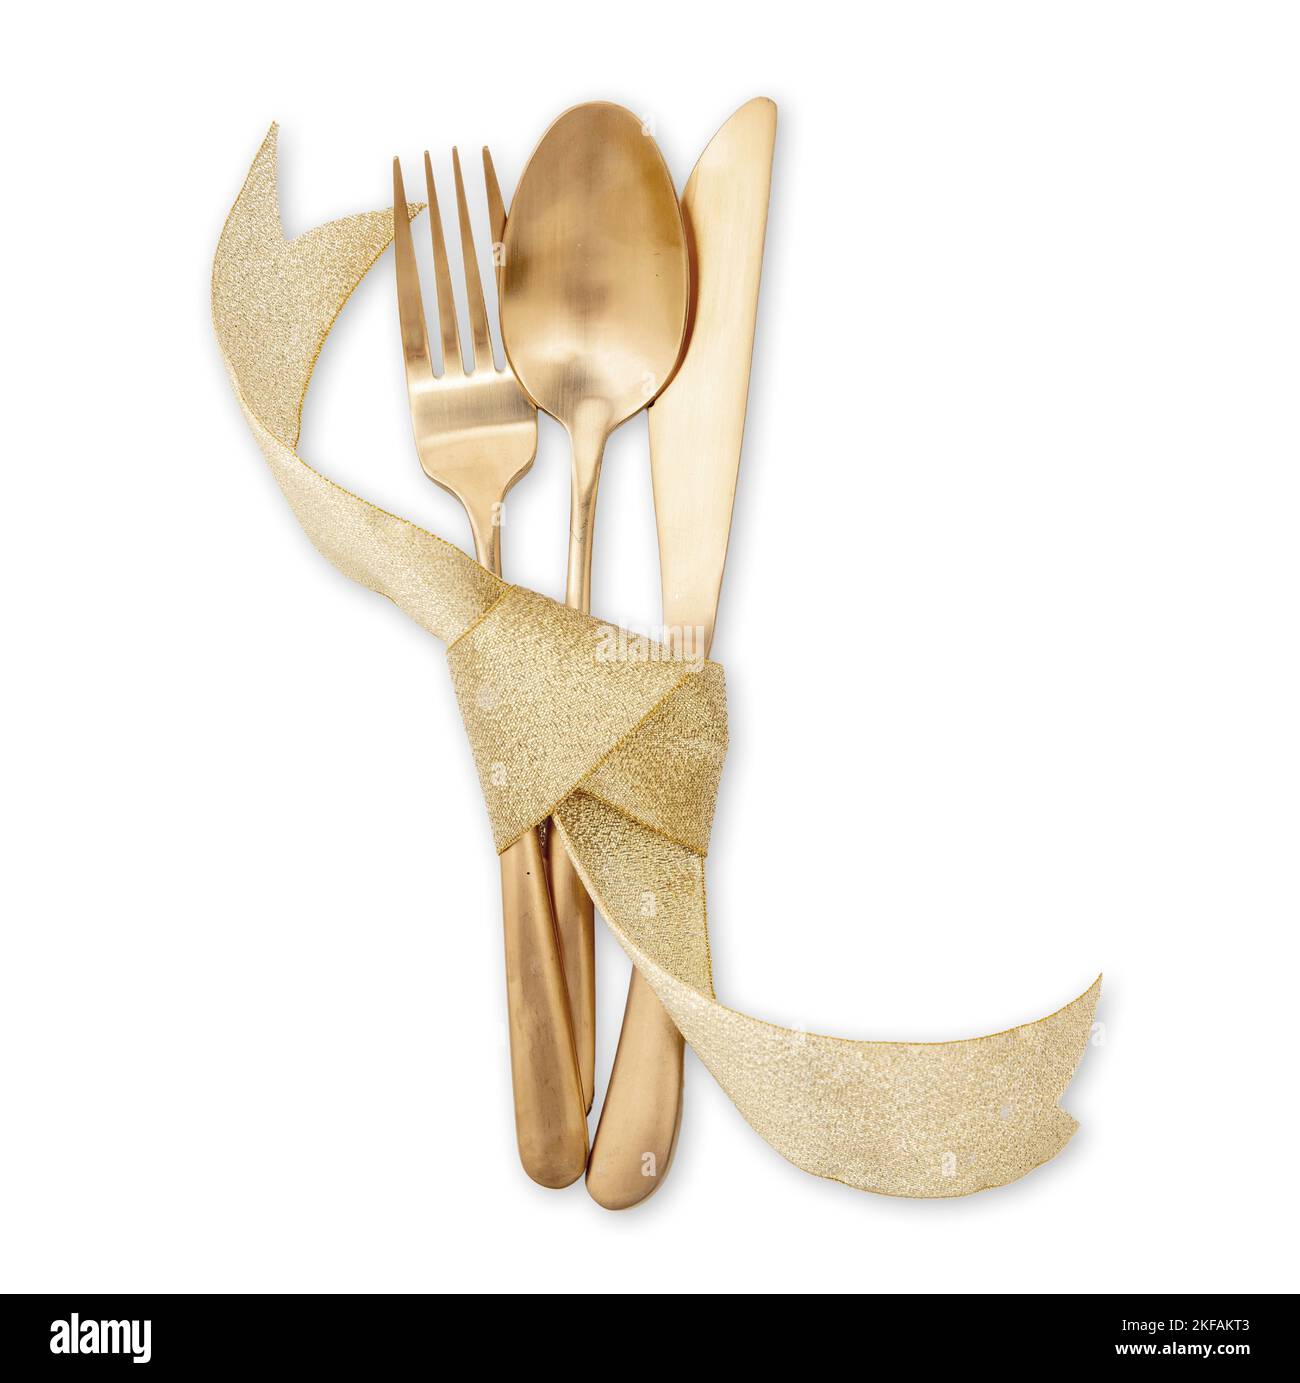 Gold cutlery and ribbon decoration isolated on white. Christmas table setting top view. Holiday celebration dinner. Stock Photo